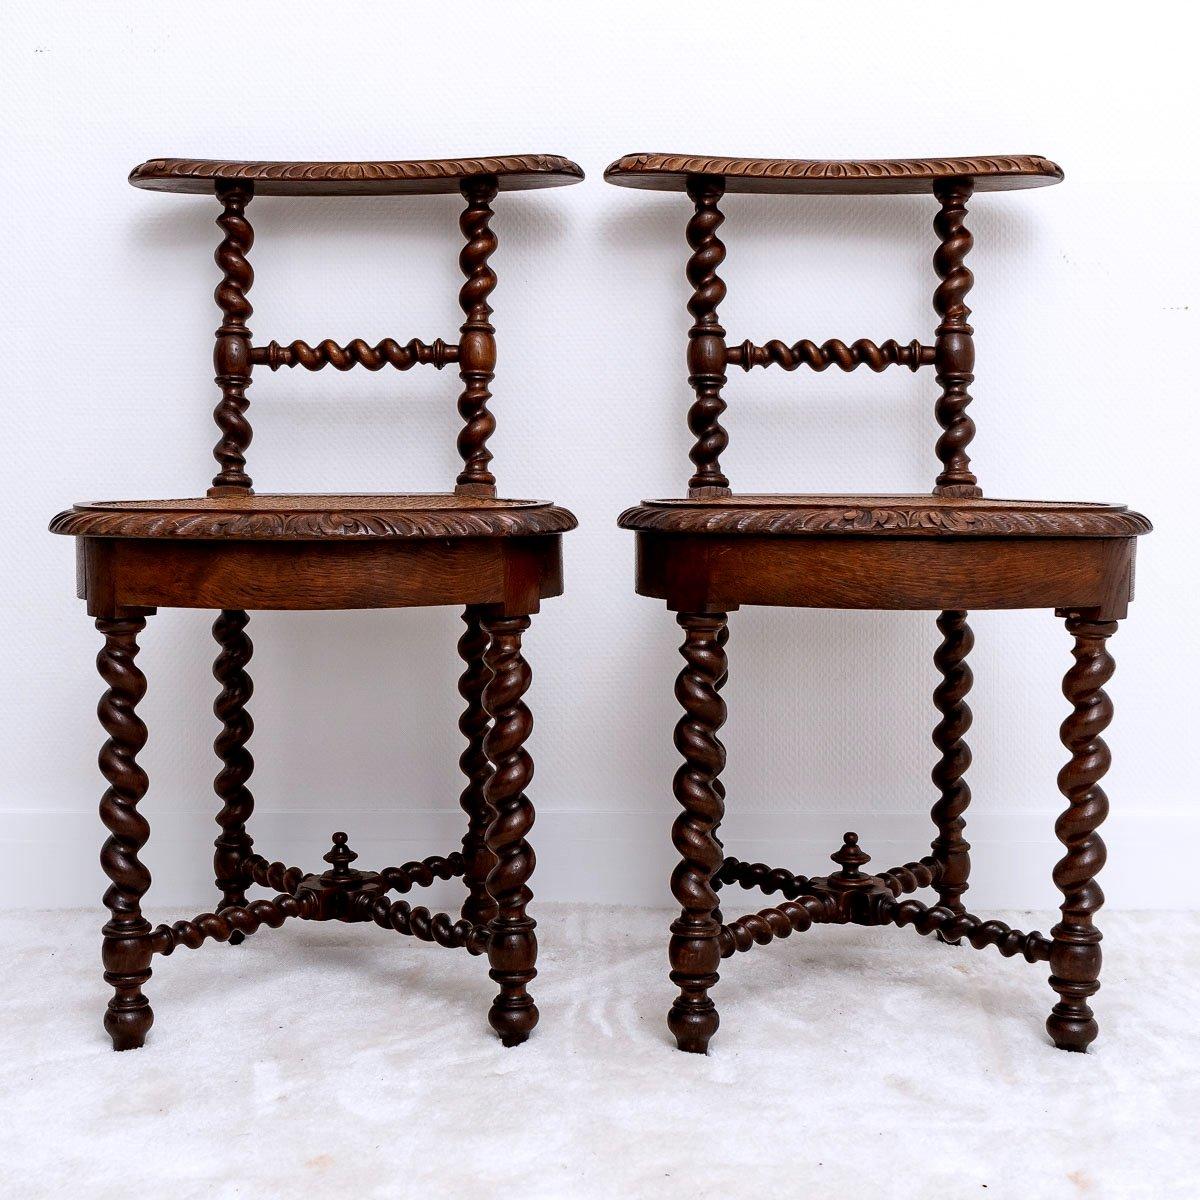 Charming pair of chairs called 